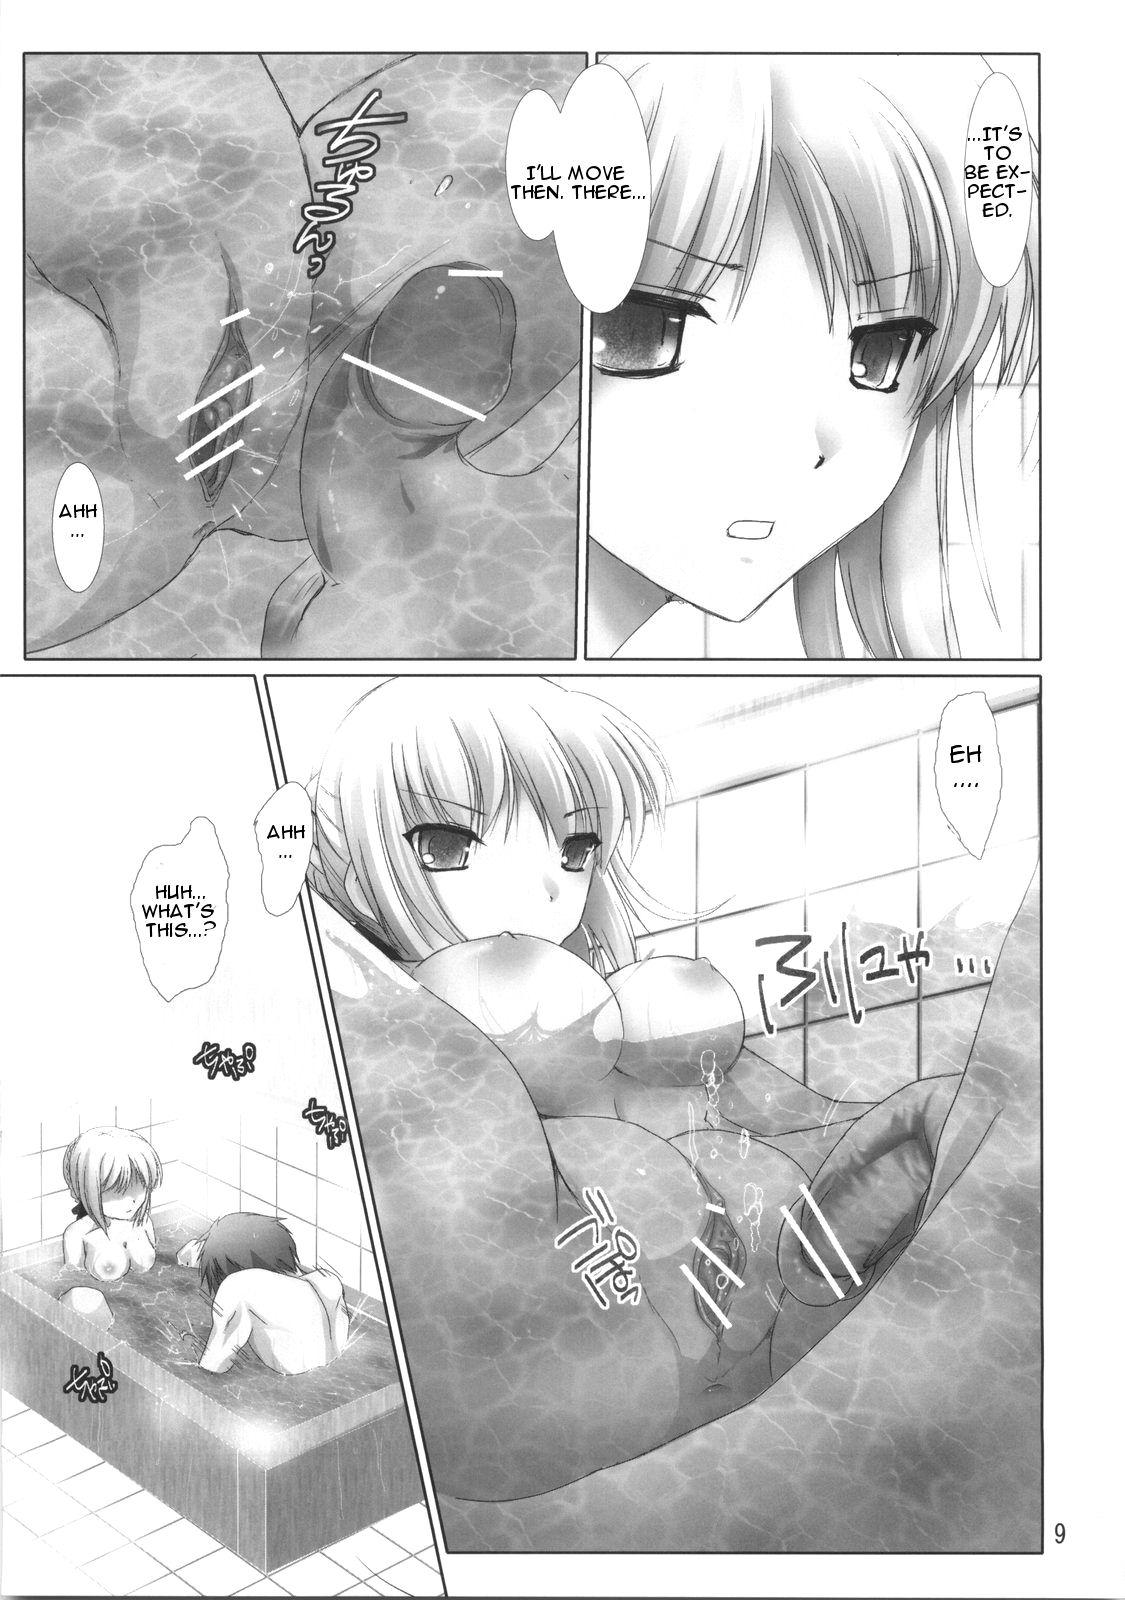 Transexual BLACK 99% - Fate stay night Fate hollow ataraxia Hardcore Sex - Page 8